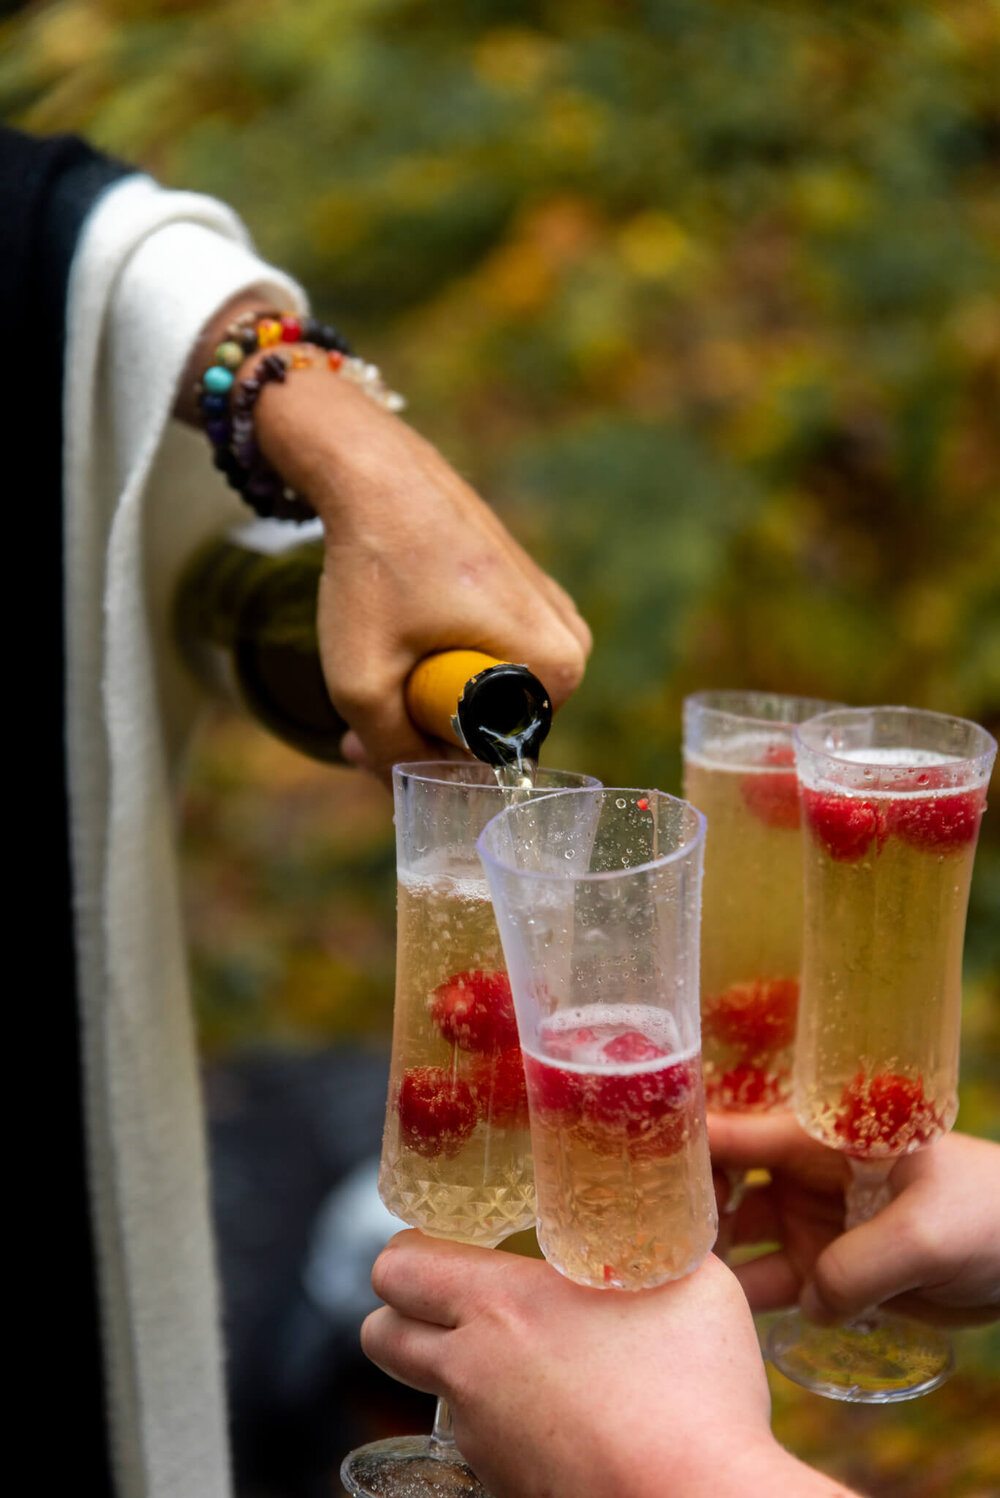 Champage being poured into champagne flutes filled with raspberries during elopement reception